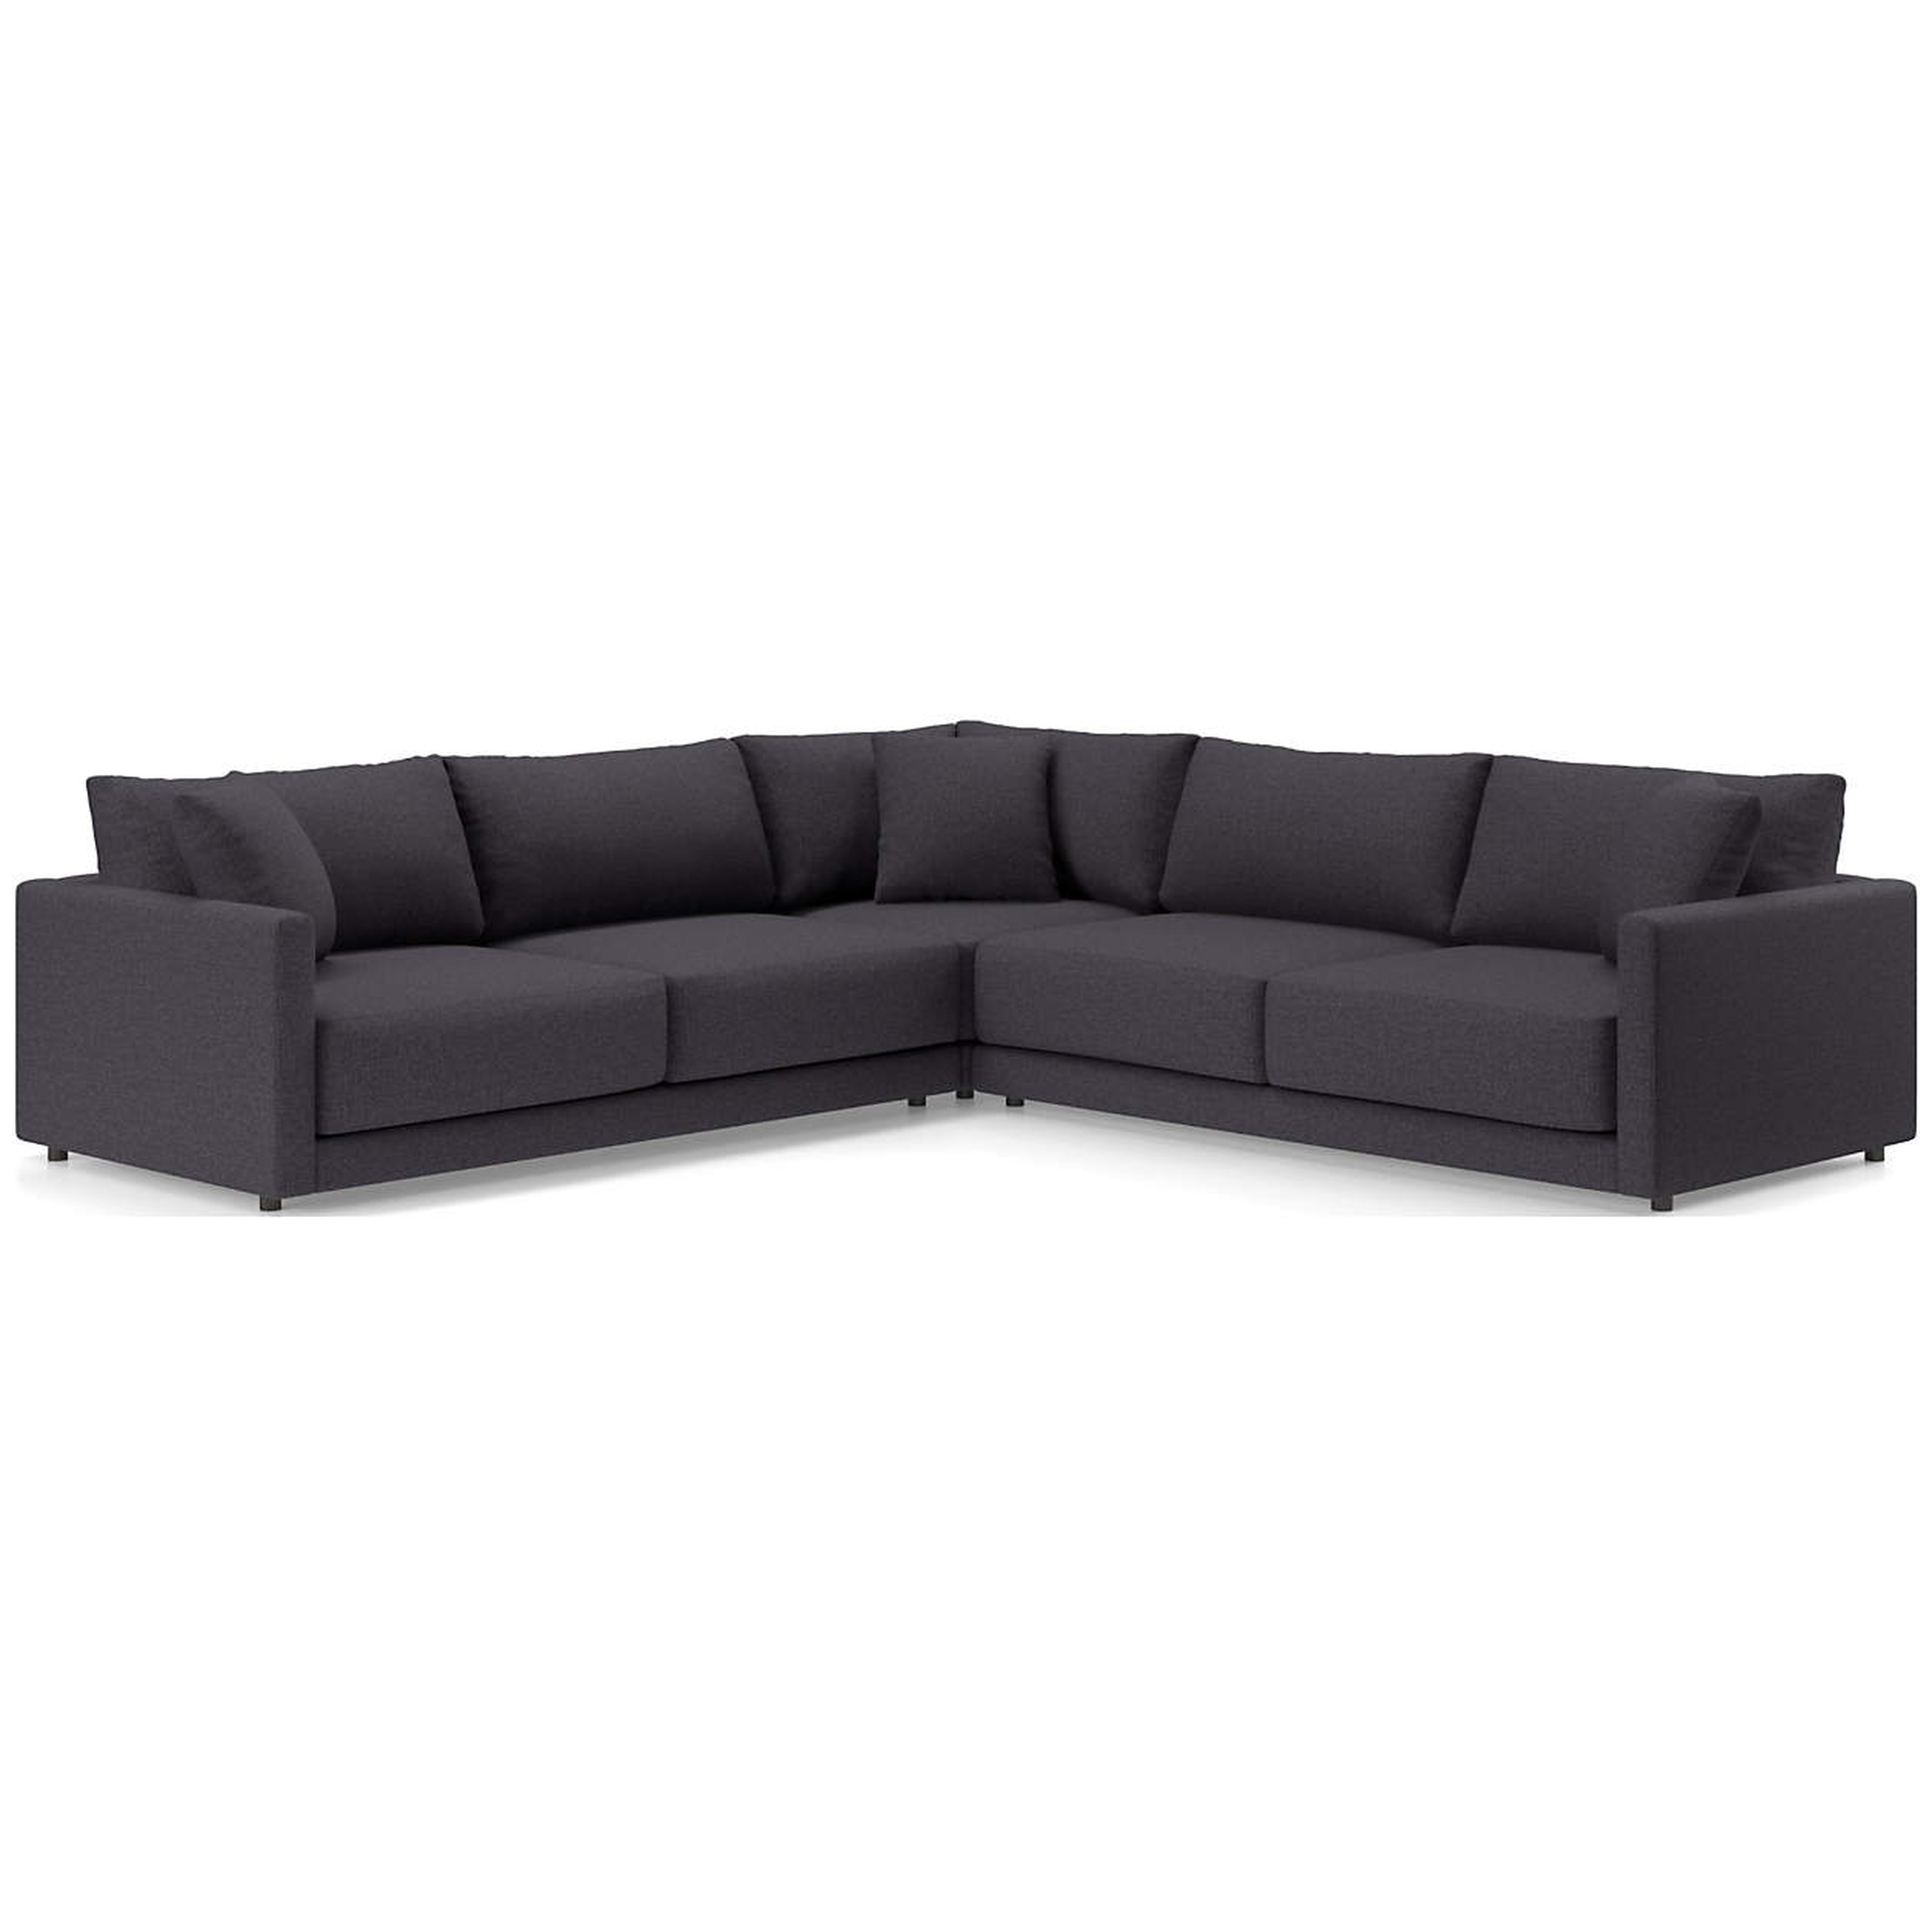 Gather 3-Piece Sectional - Crate and Barrel